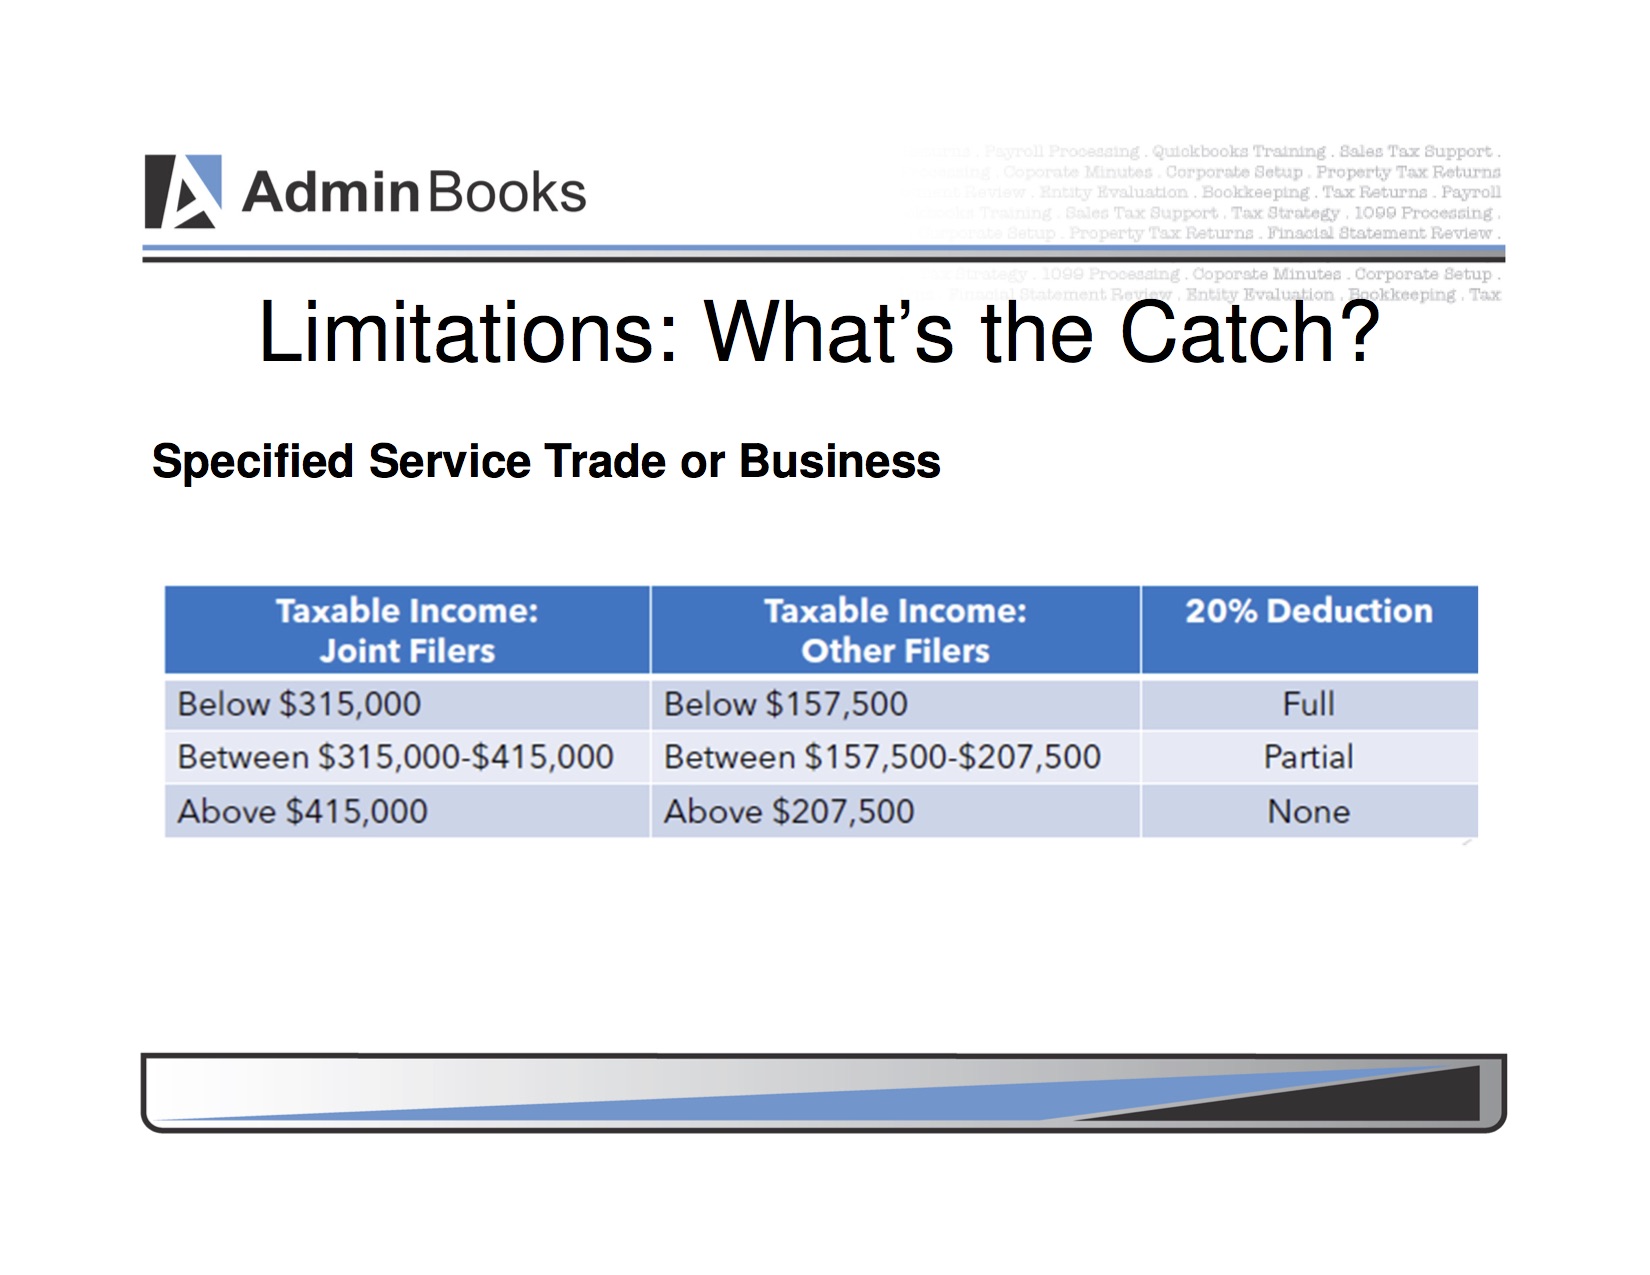 Specified Service Trades or Businesses